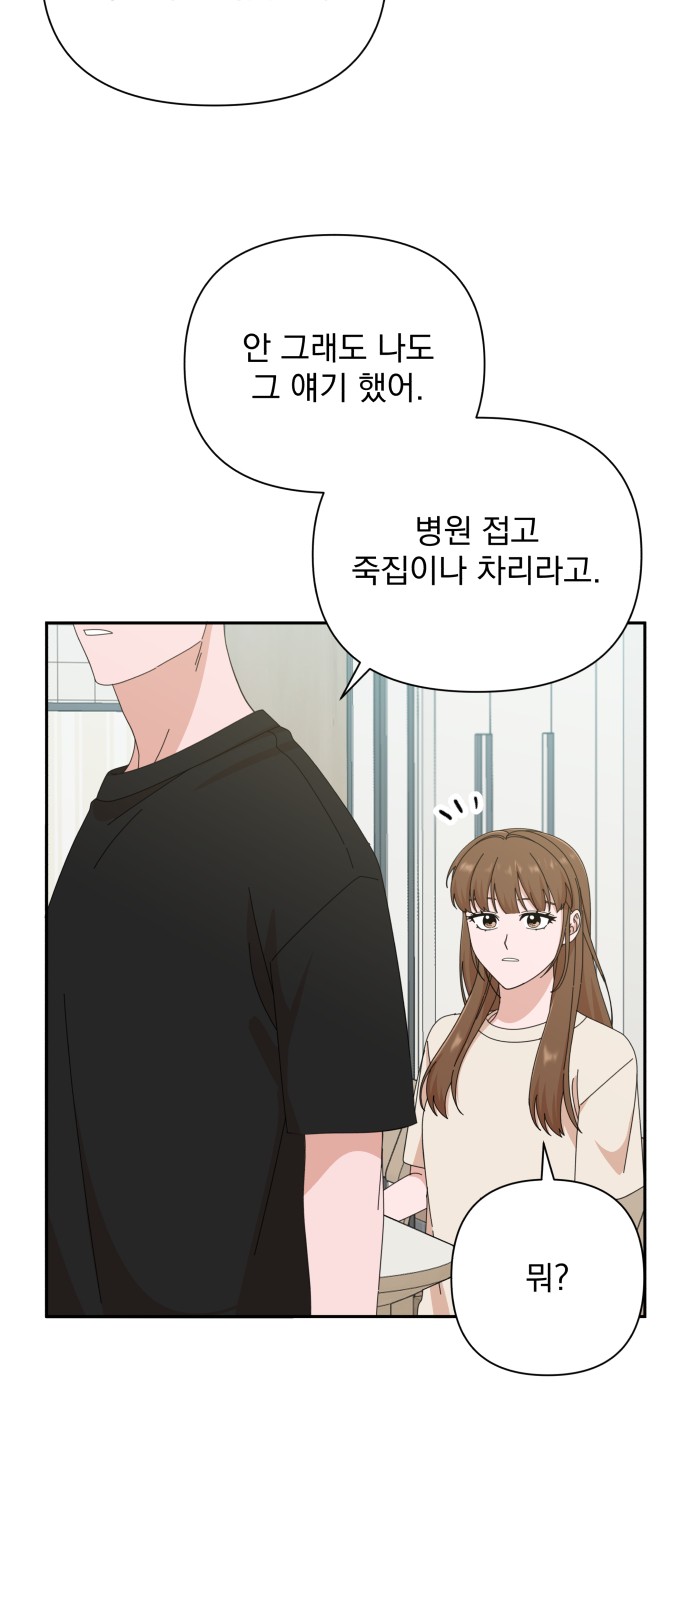 The Man With Pretty Lips - Chapter 44 - Page 2